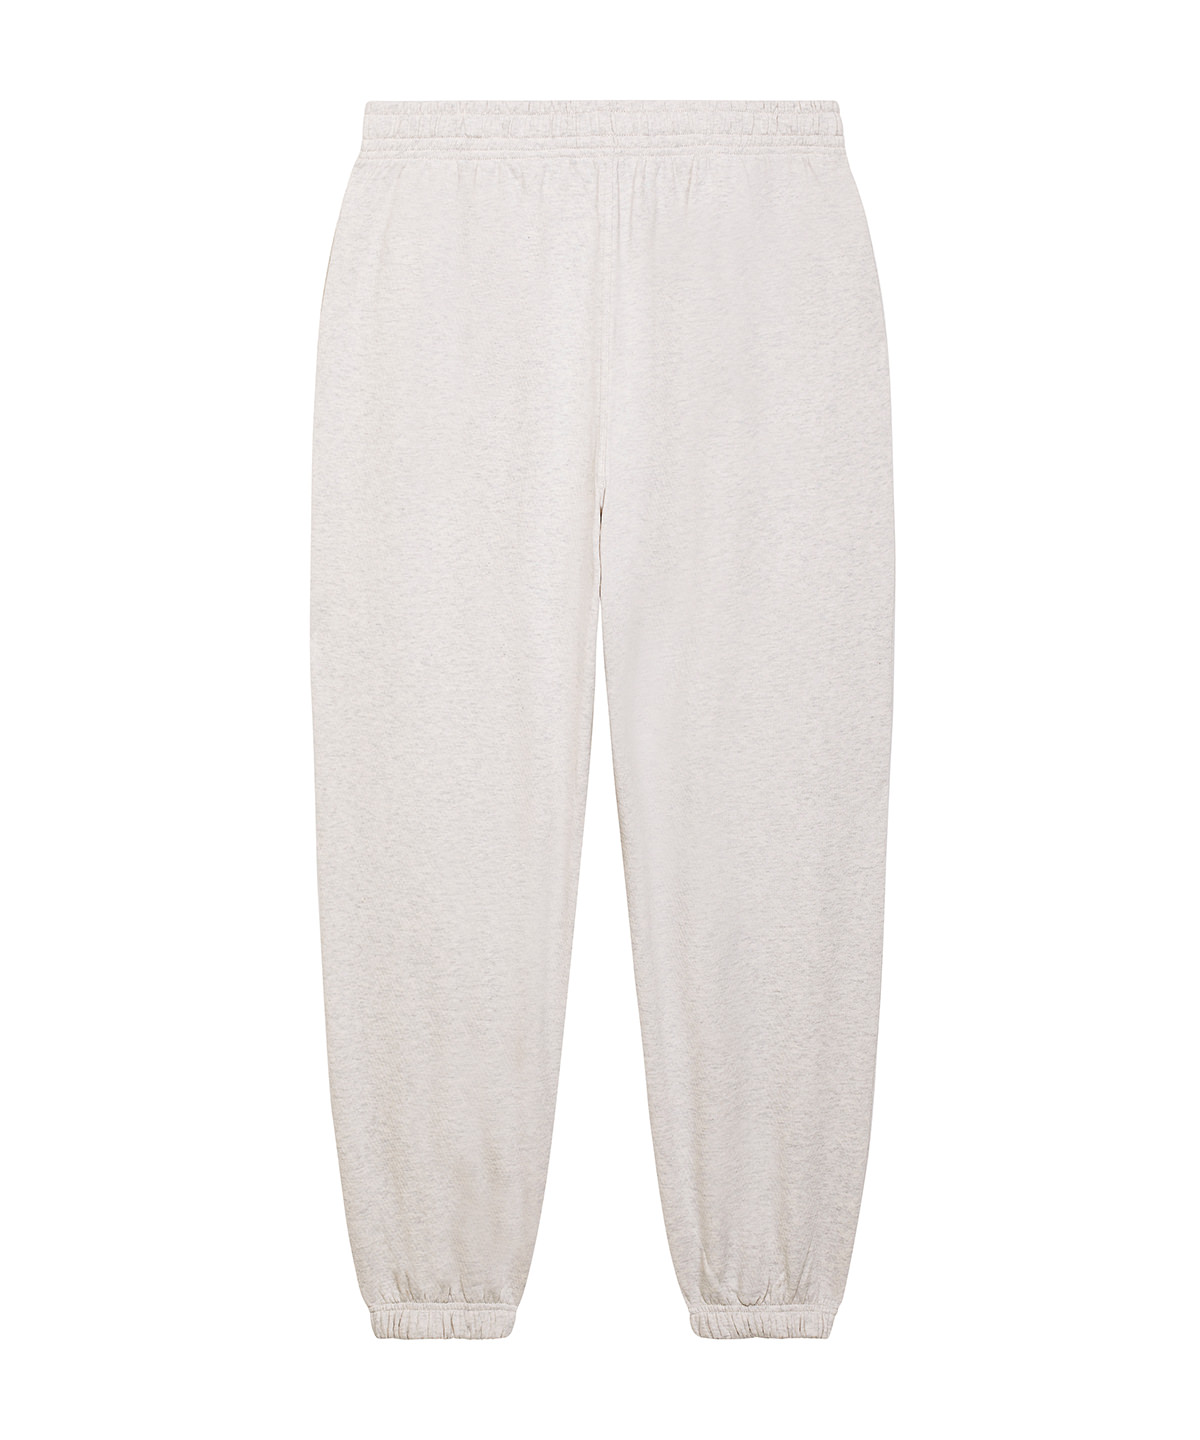 stanley/stella Decker Wave Terry relaxed fit jogger pants